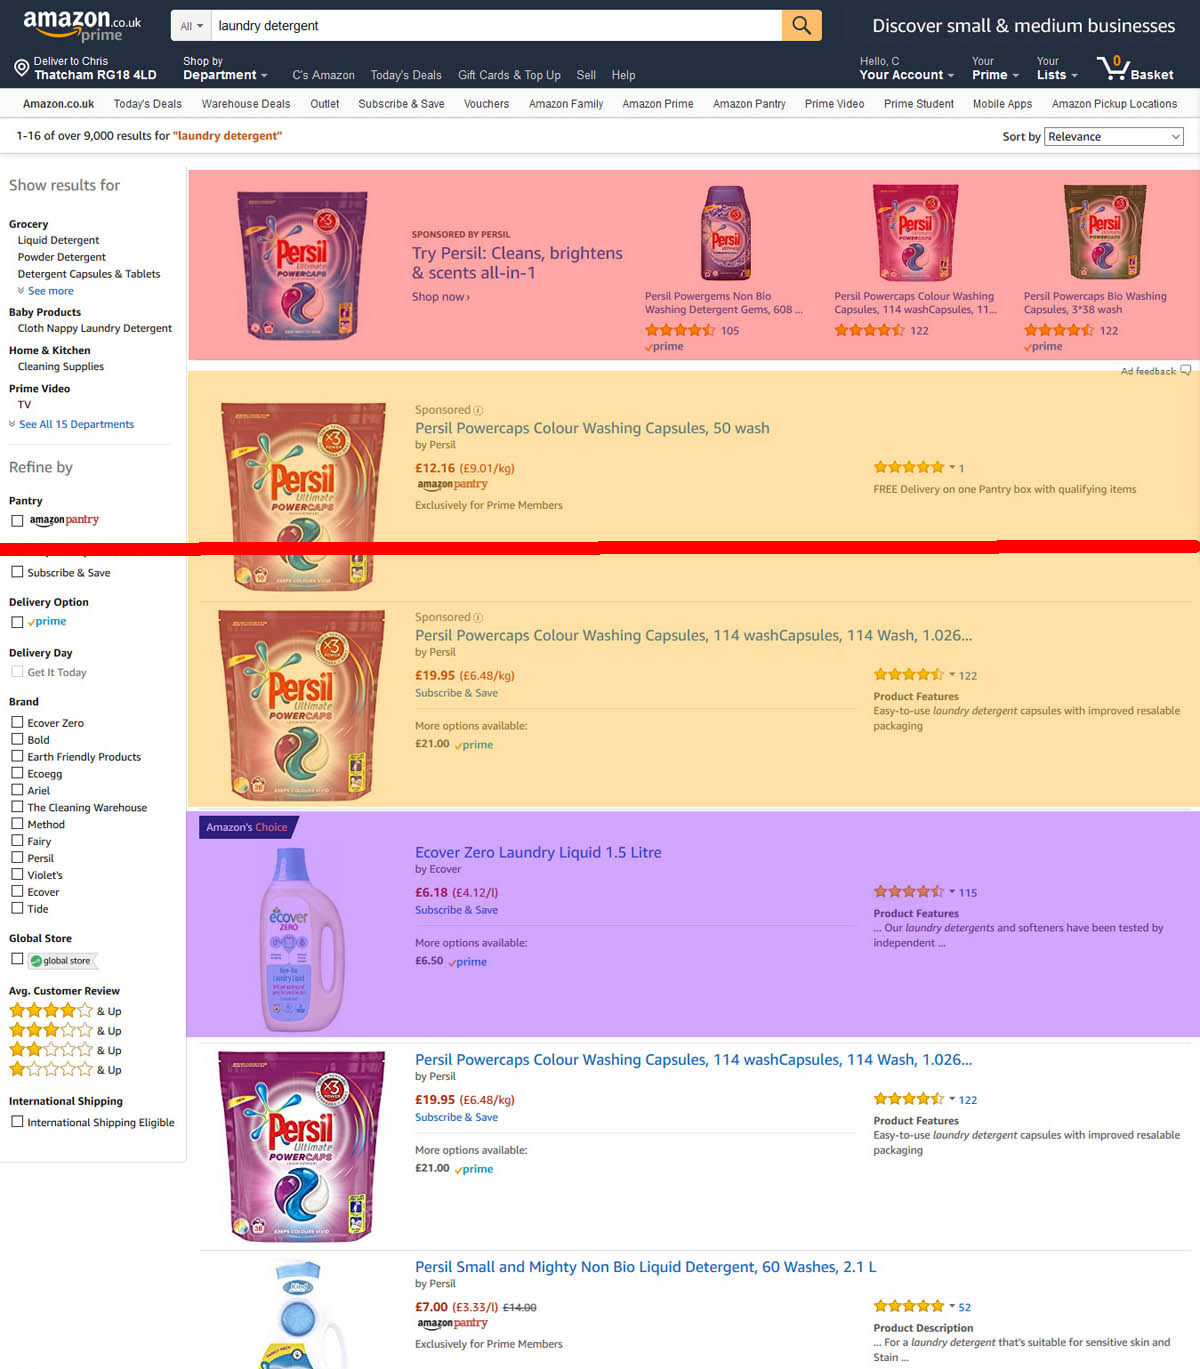 Amazon Advertising on search results page for laundry detergent